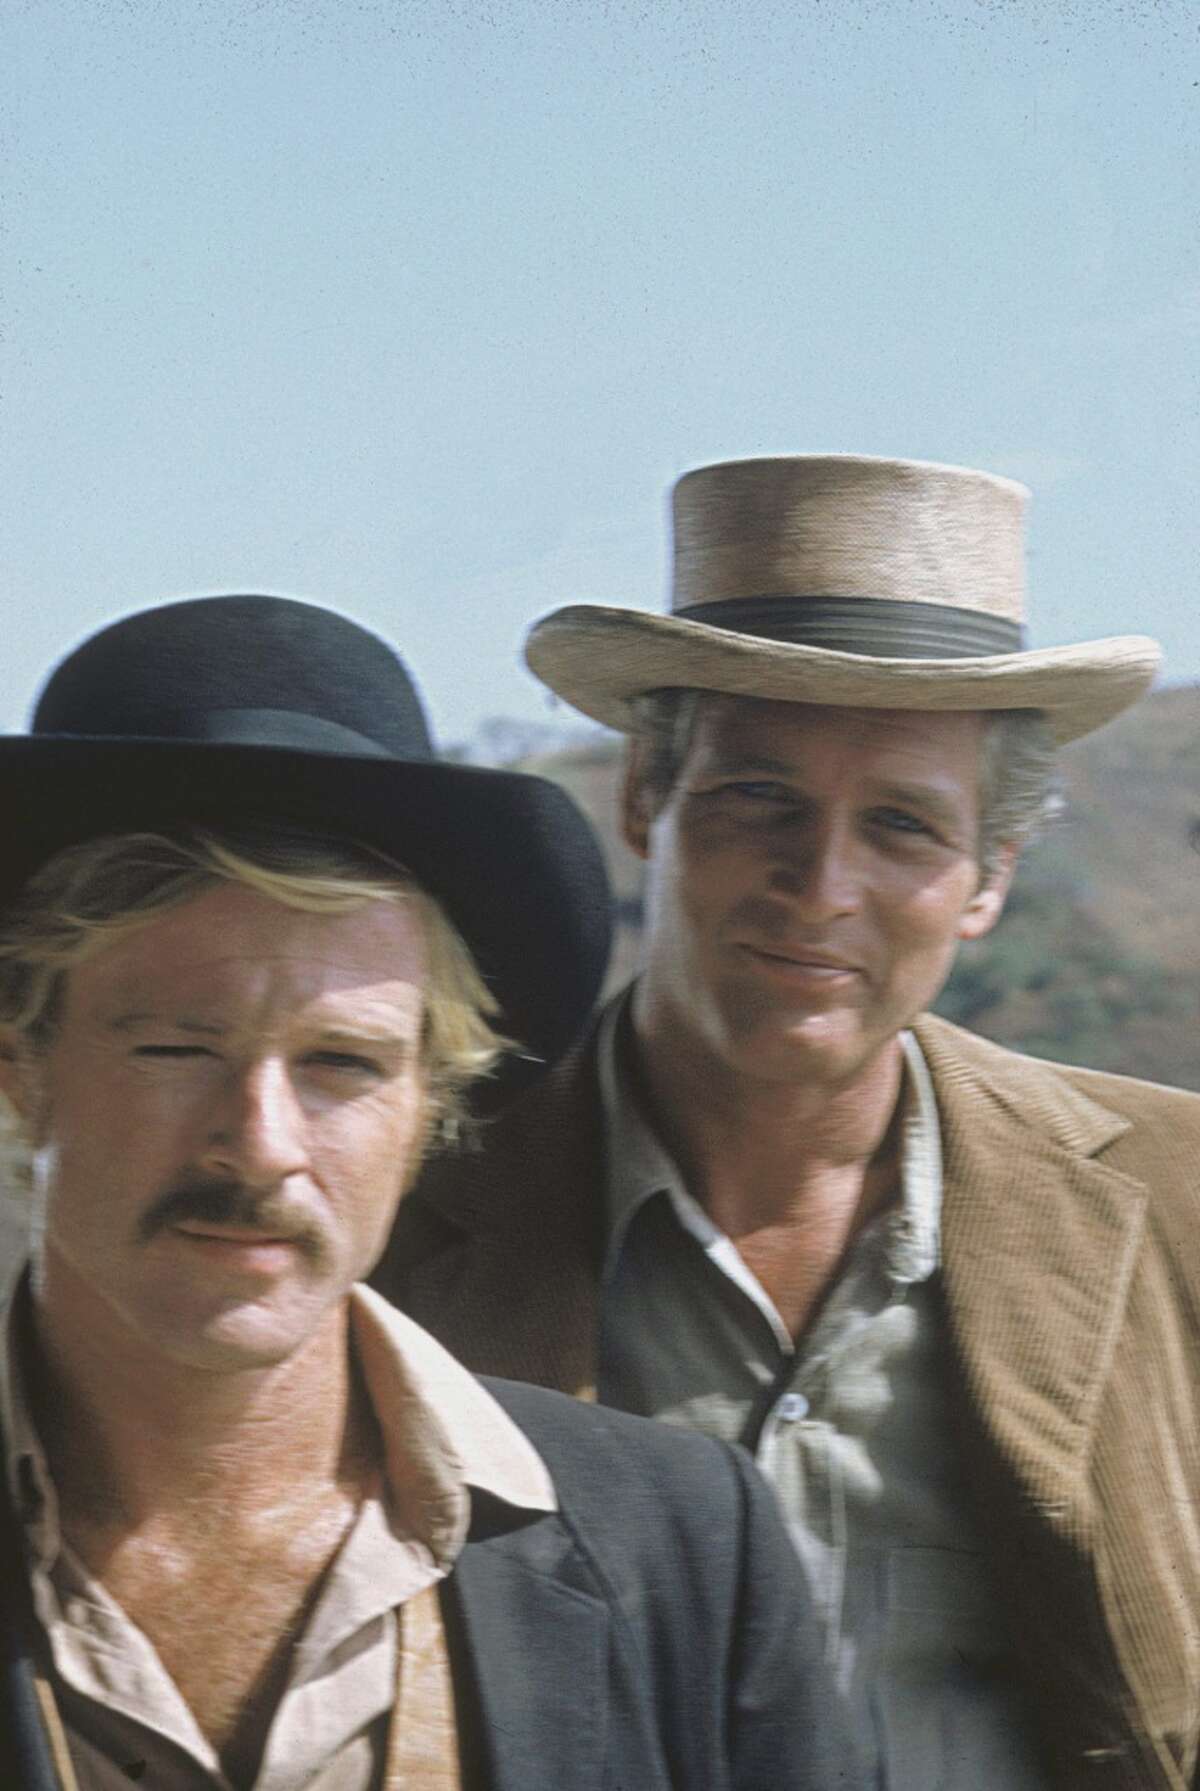 Sundance Kid Redford was a successful actor and star before 1969's "Butch Cassidy and the Sundance Kid" with Paul Newman, but this one put him in the pantheon.